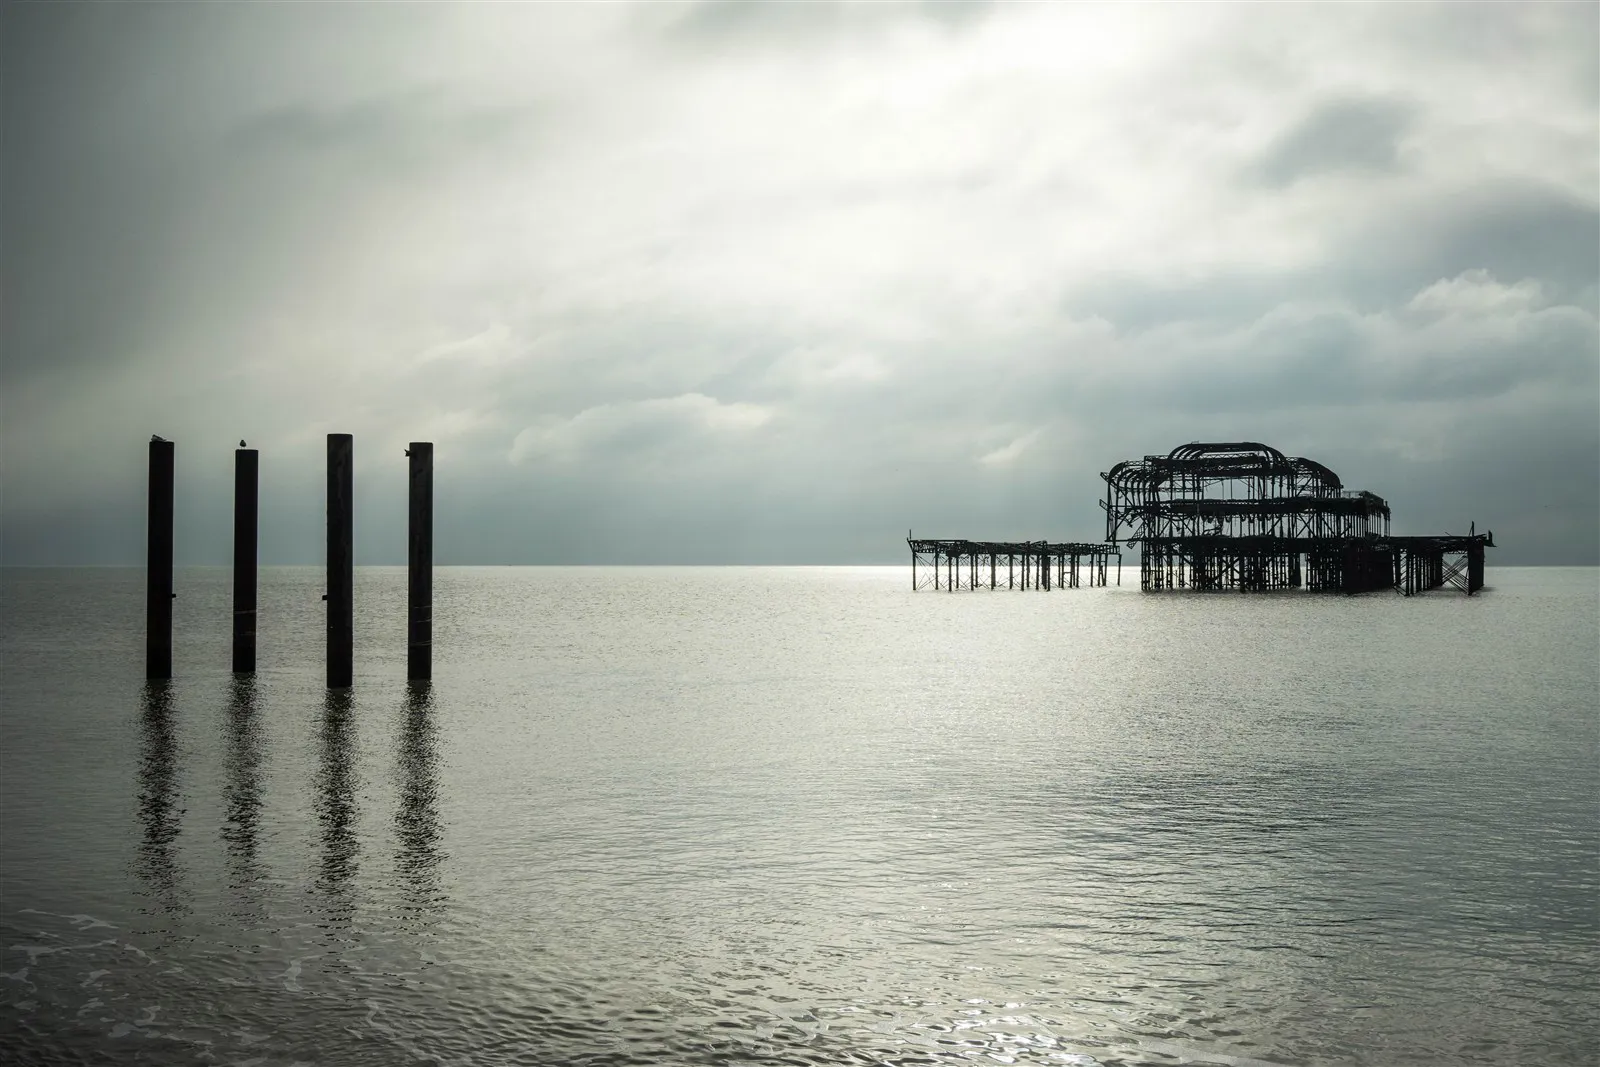 The remains of West Pier, Brighton